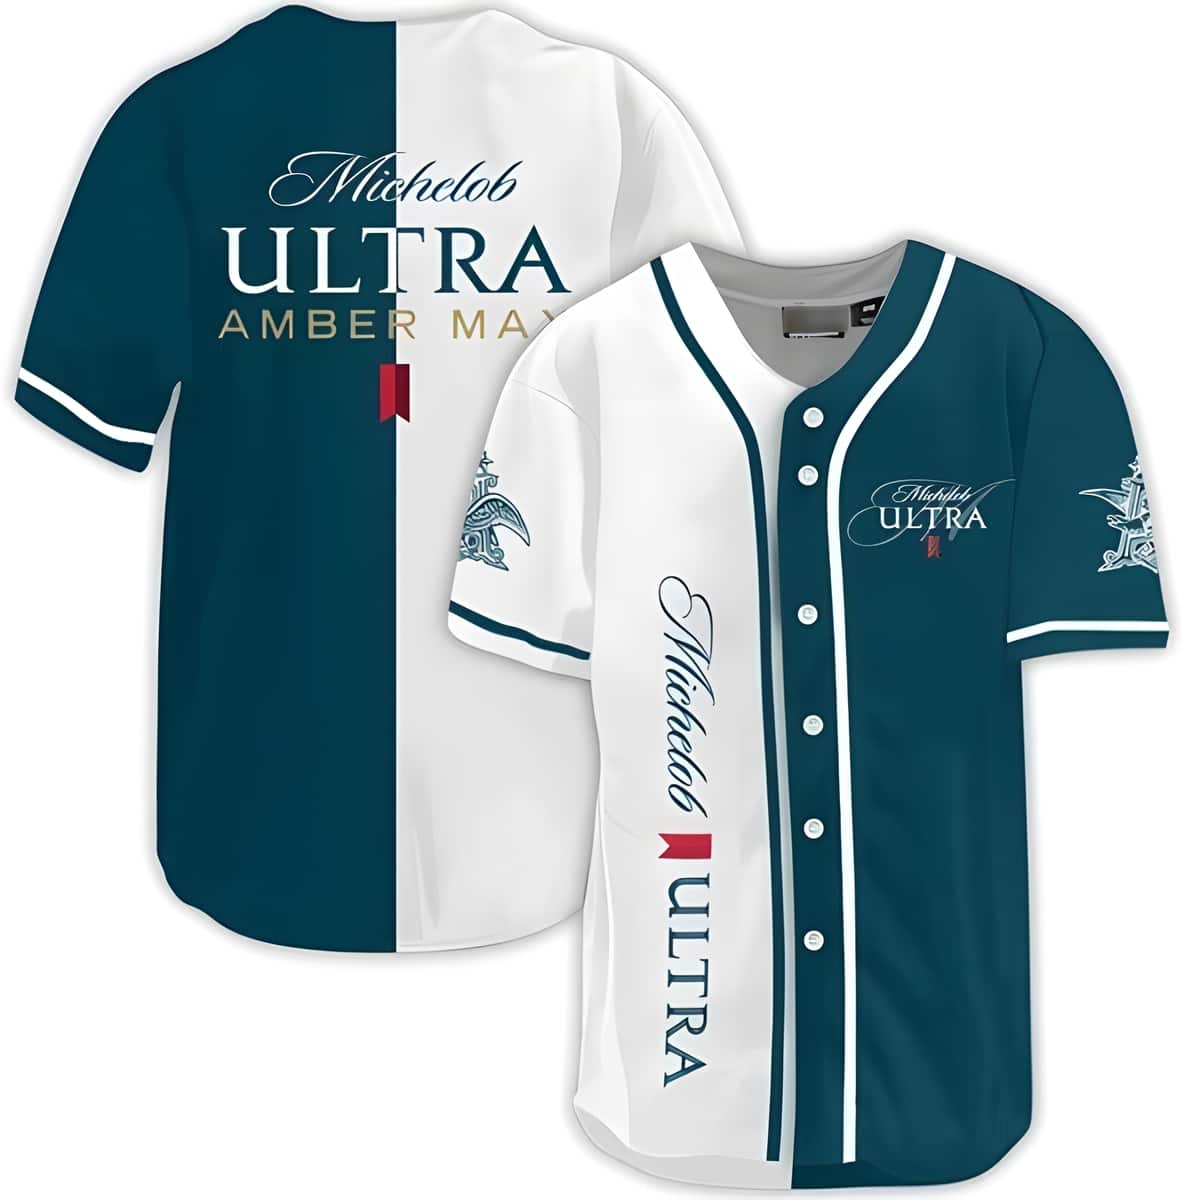 Michelob ULTRA Baseball Jersey Amber Max Best Gift For Beer Lovers